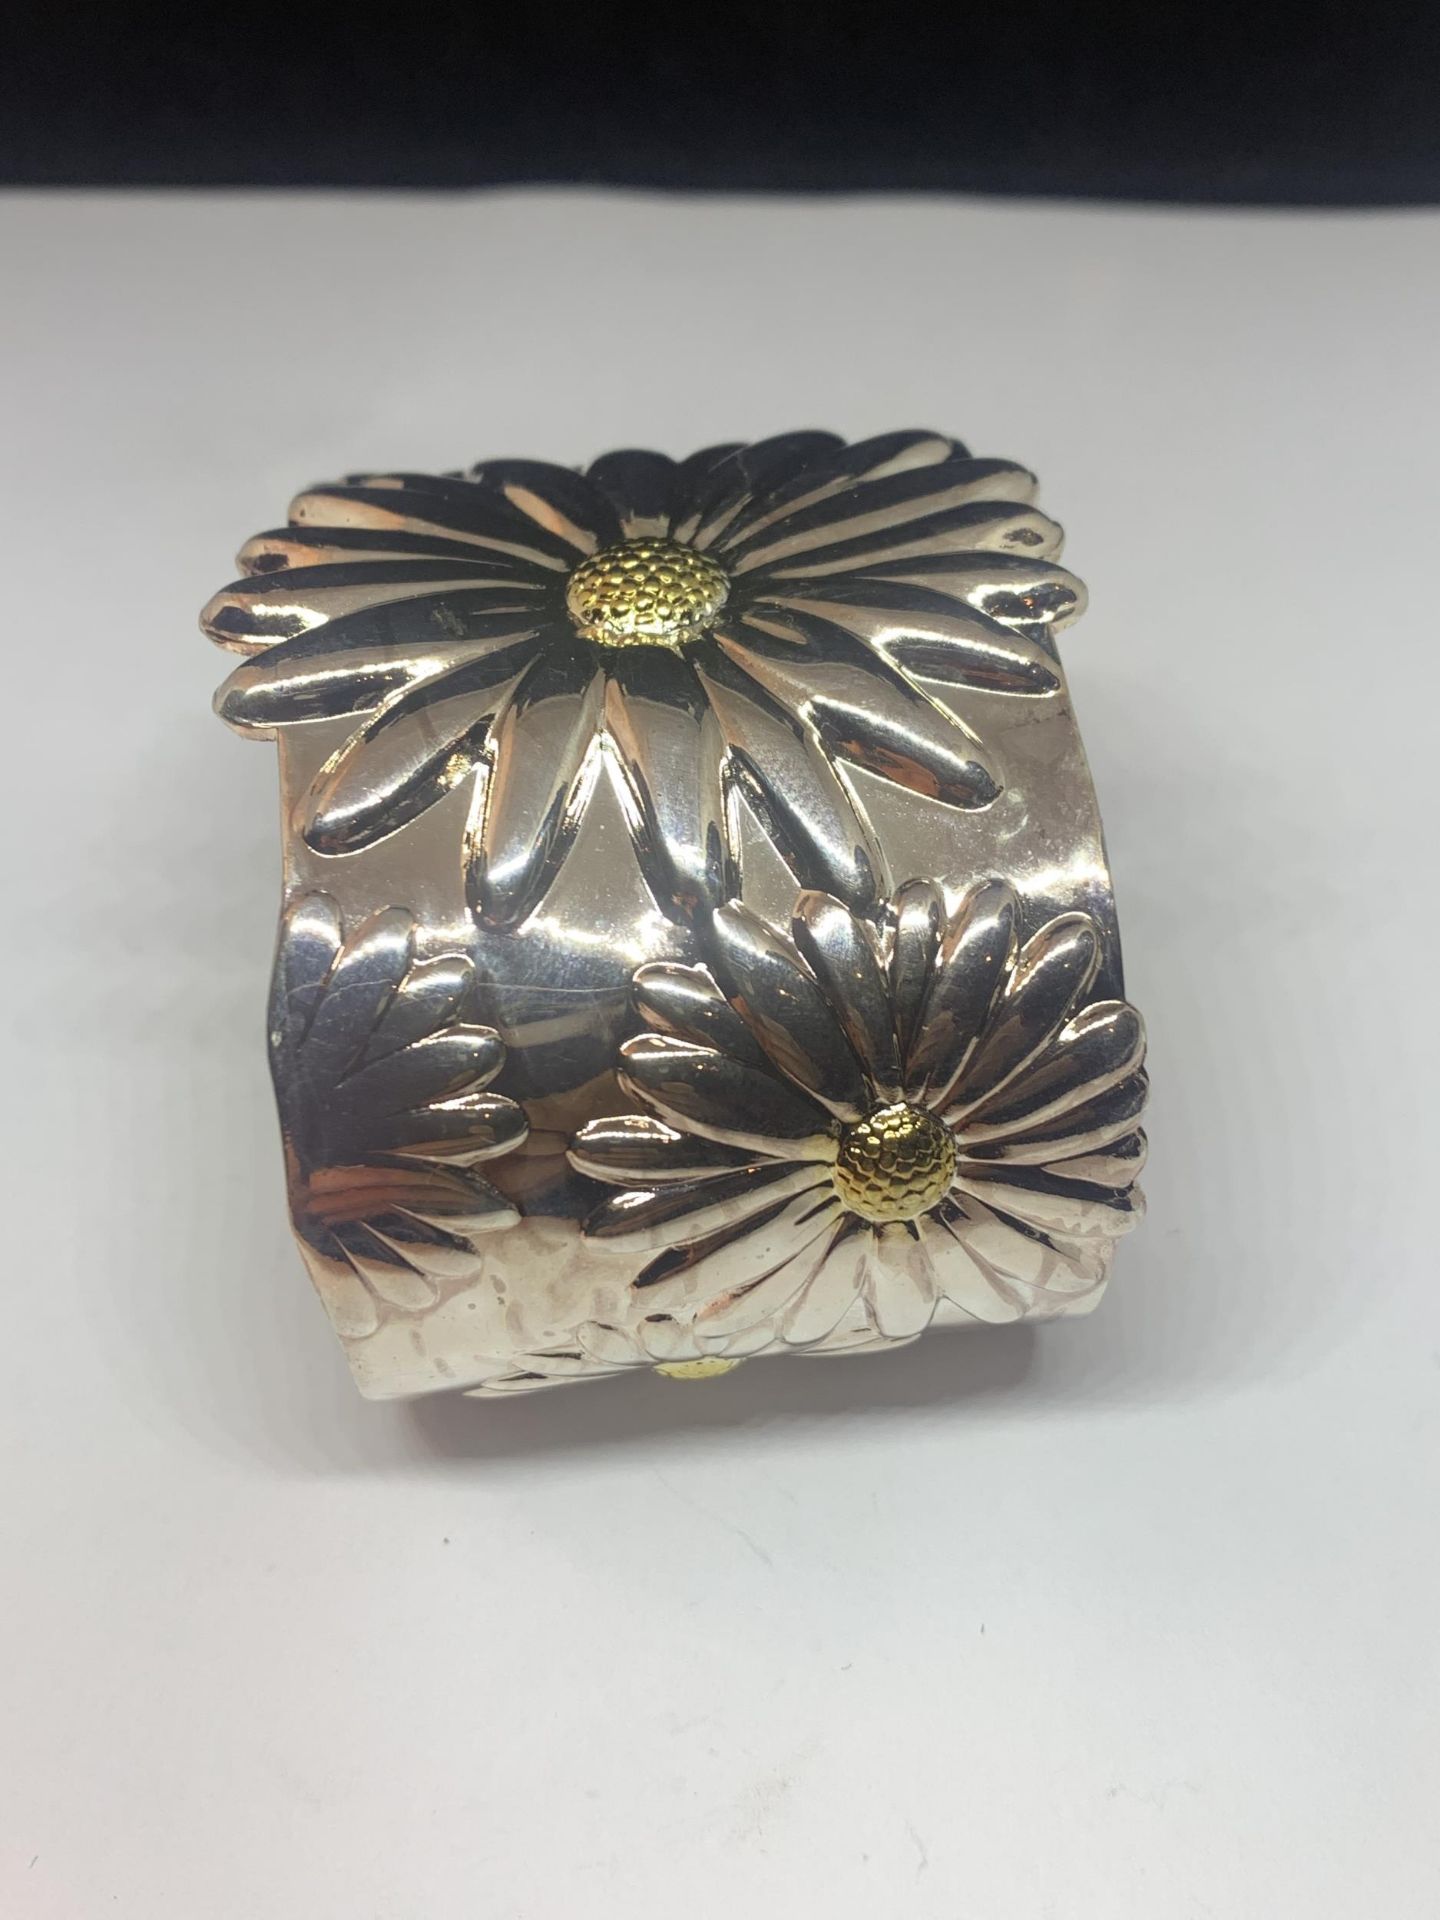 A MARKED 925 HEAVY BANGLE WITH SUNFLOWER DESIGN - Image 3 of 3